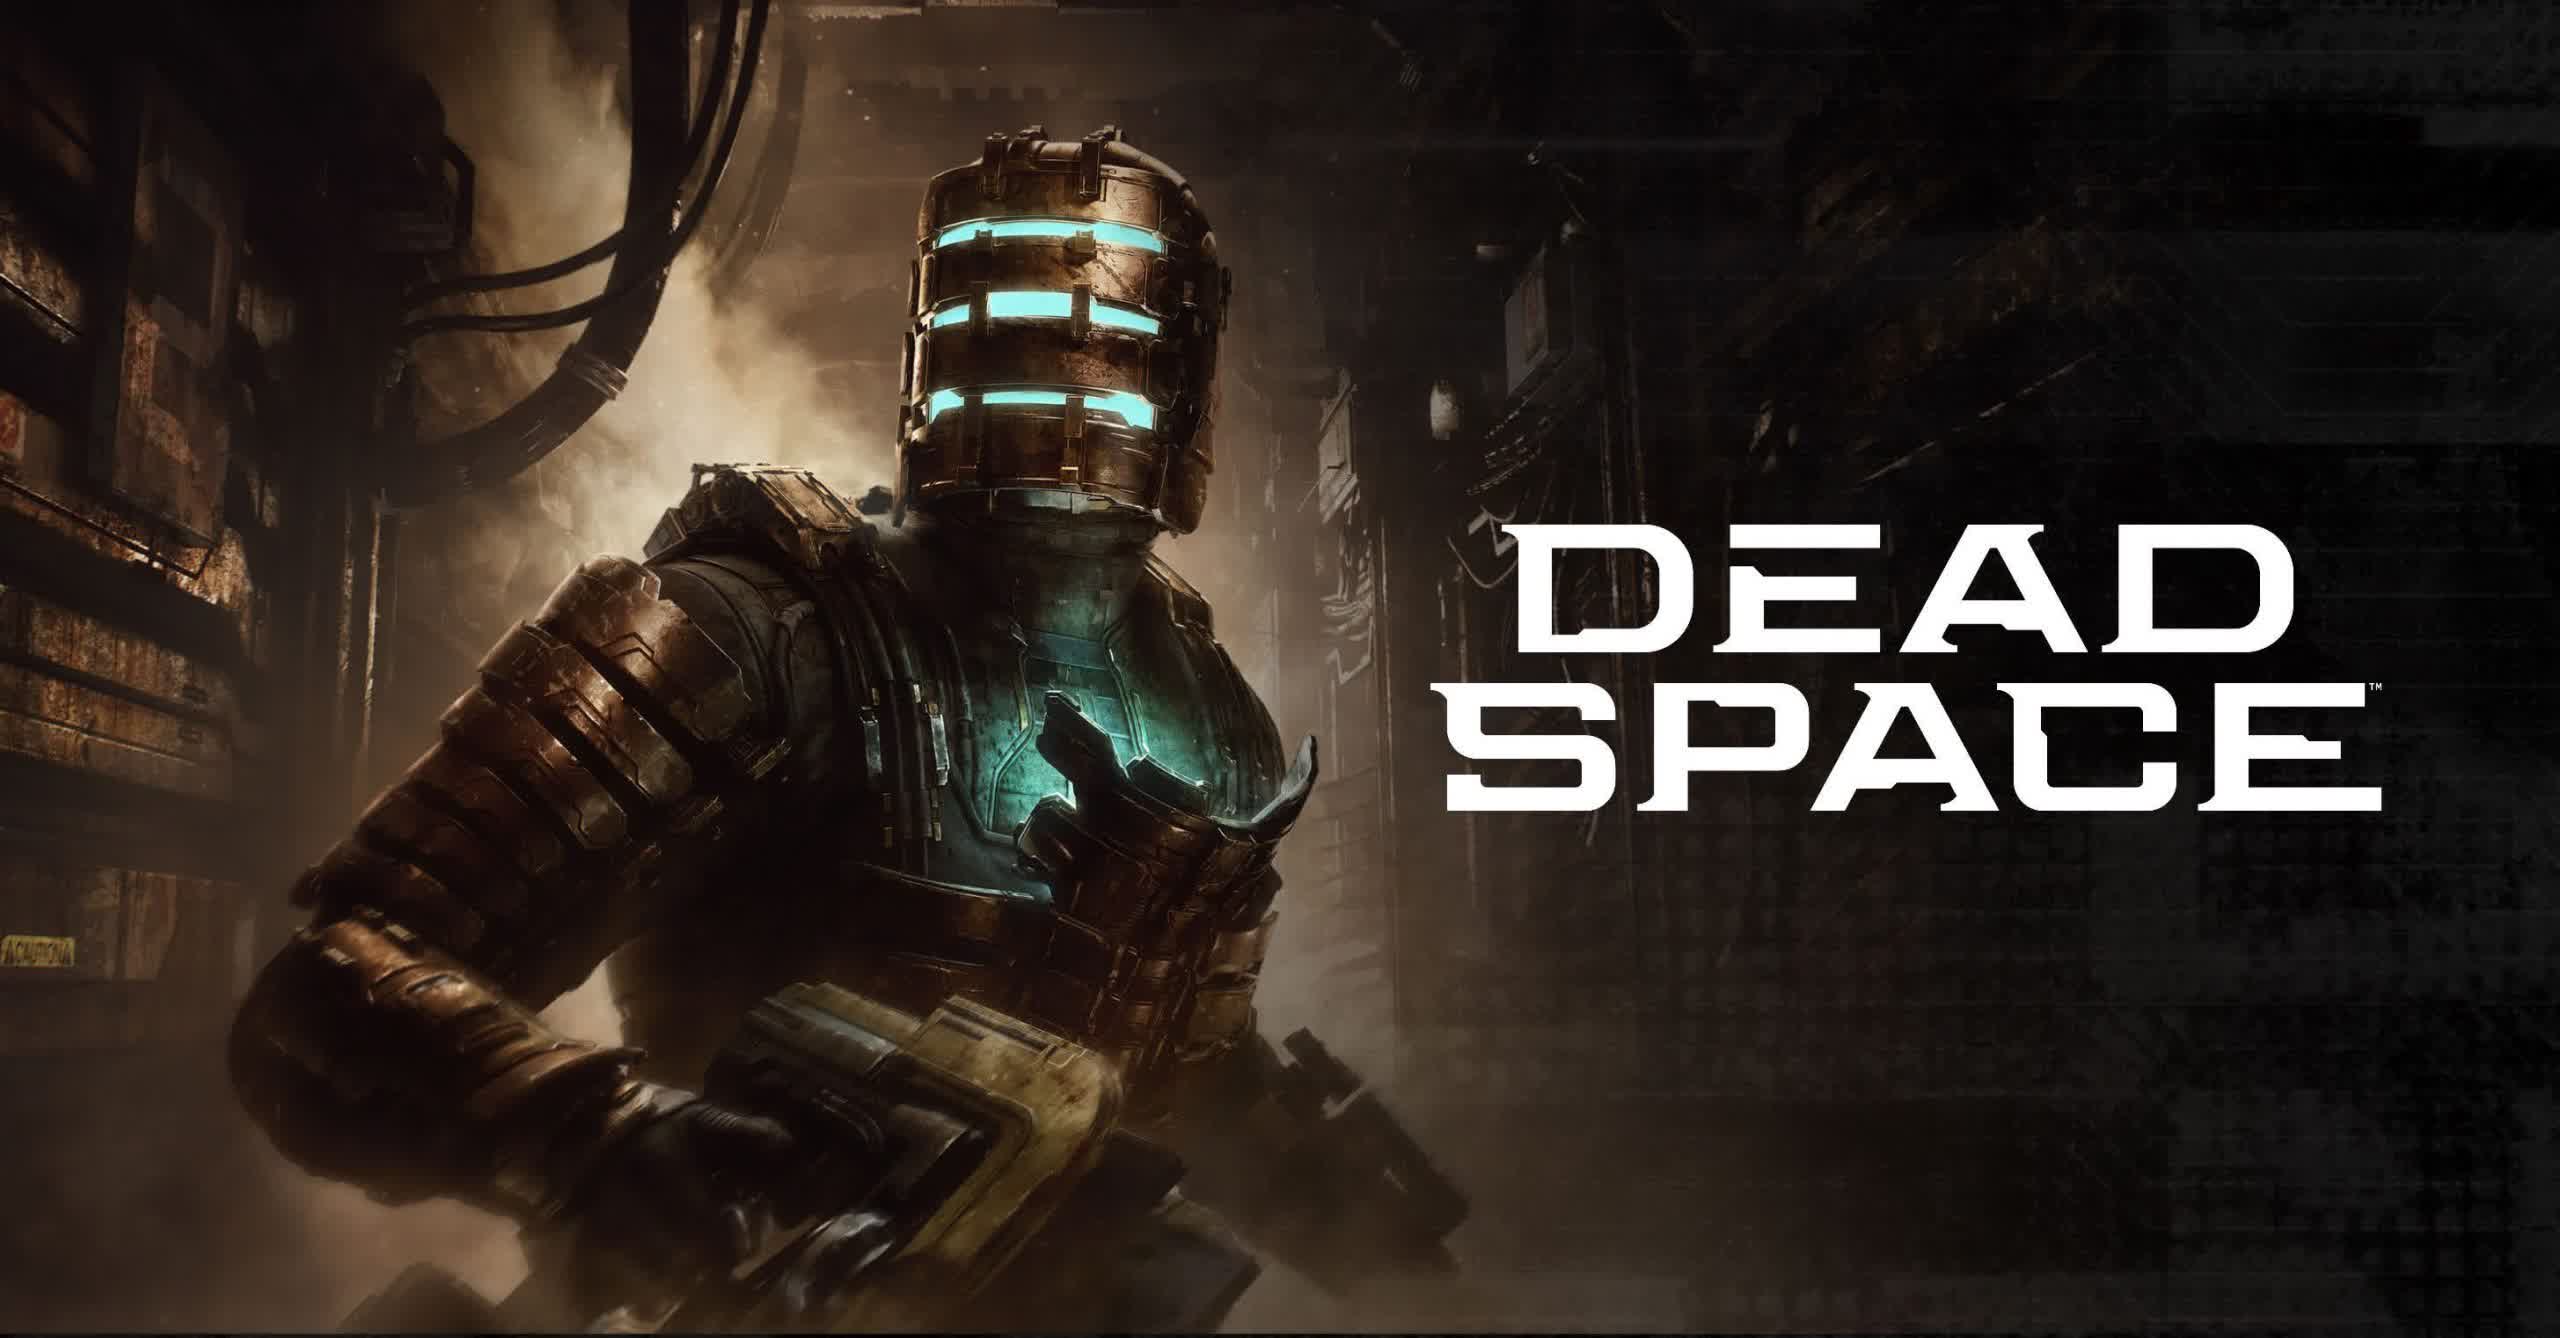 Steam gets its first timed-game trial with 90 minutes of Dead Space promotion